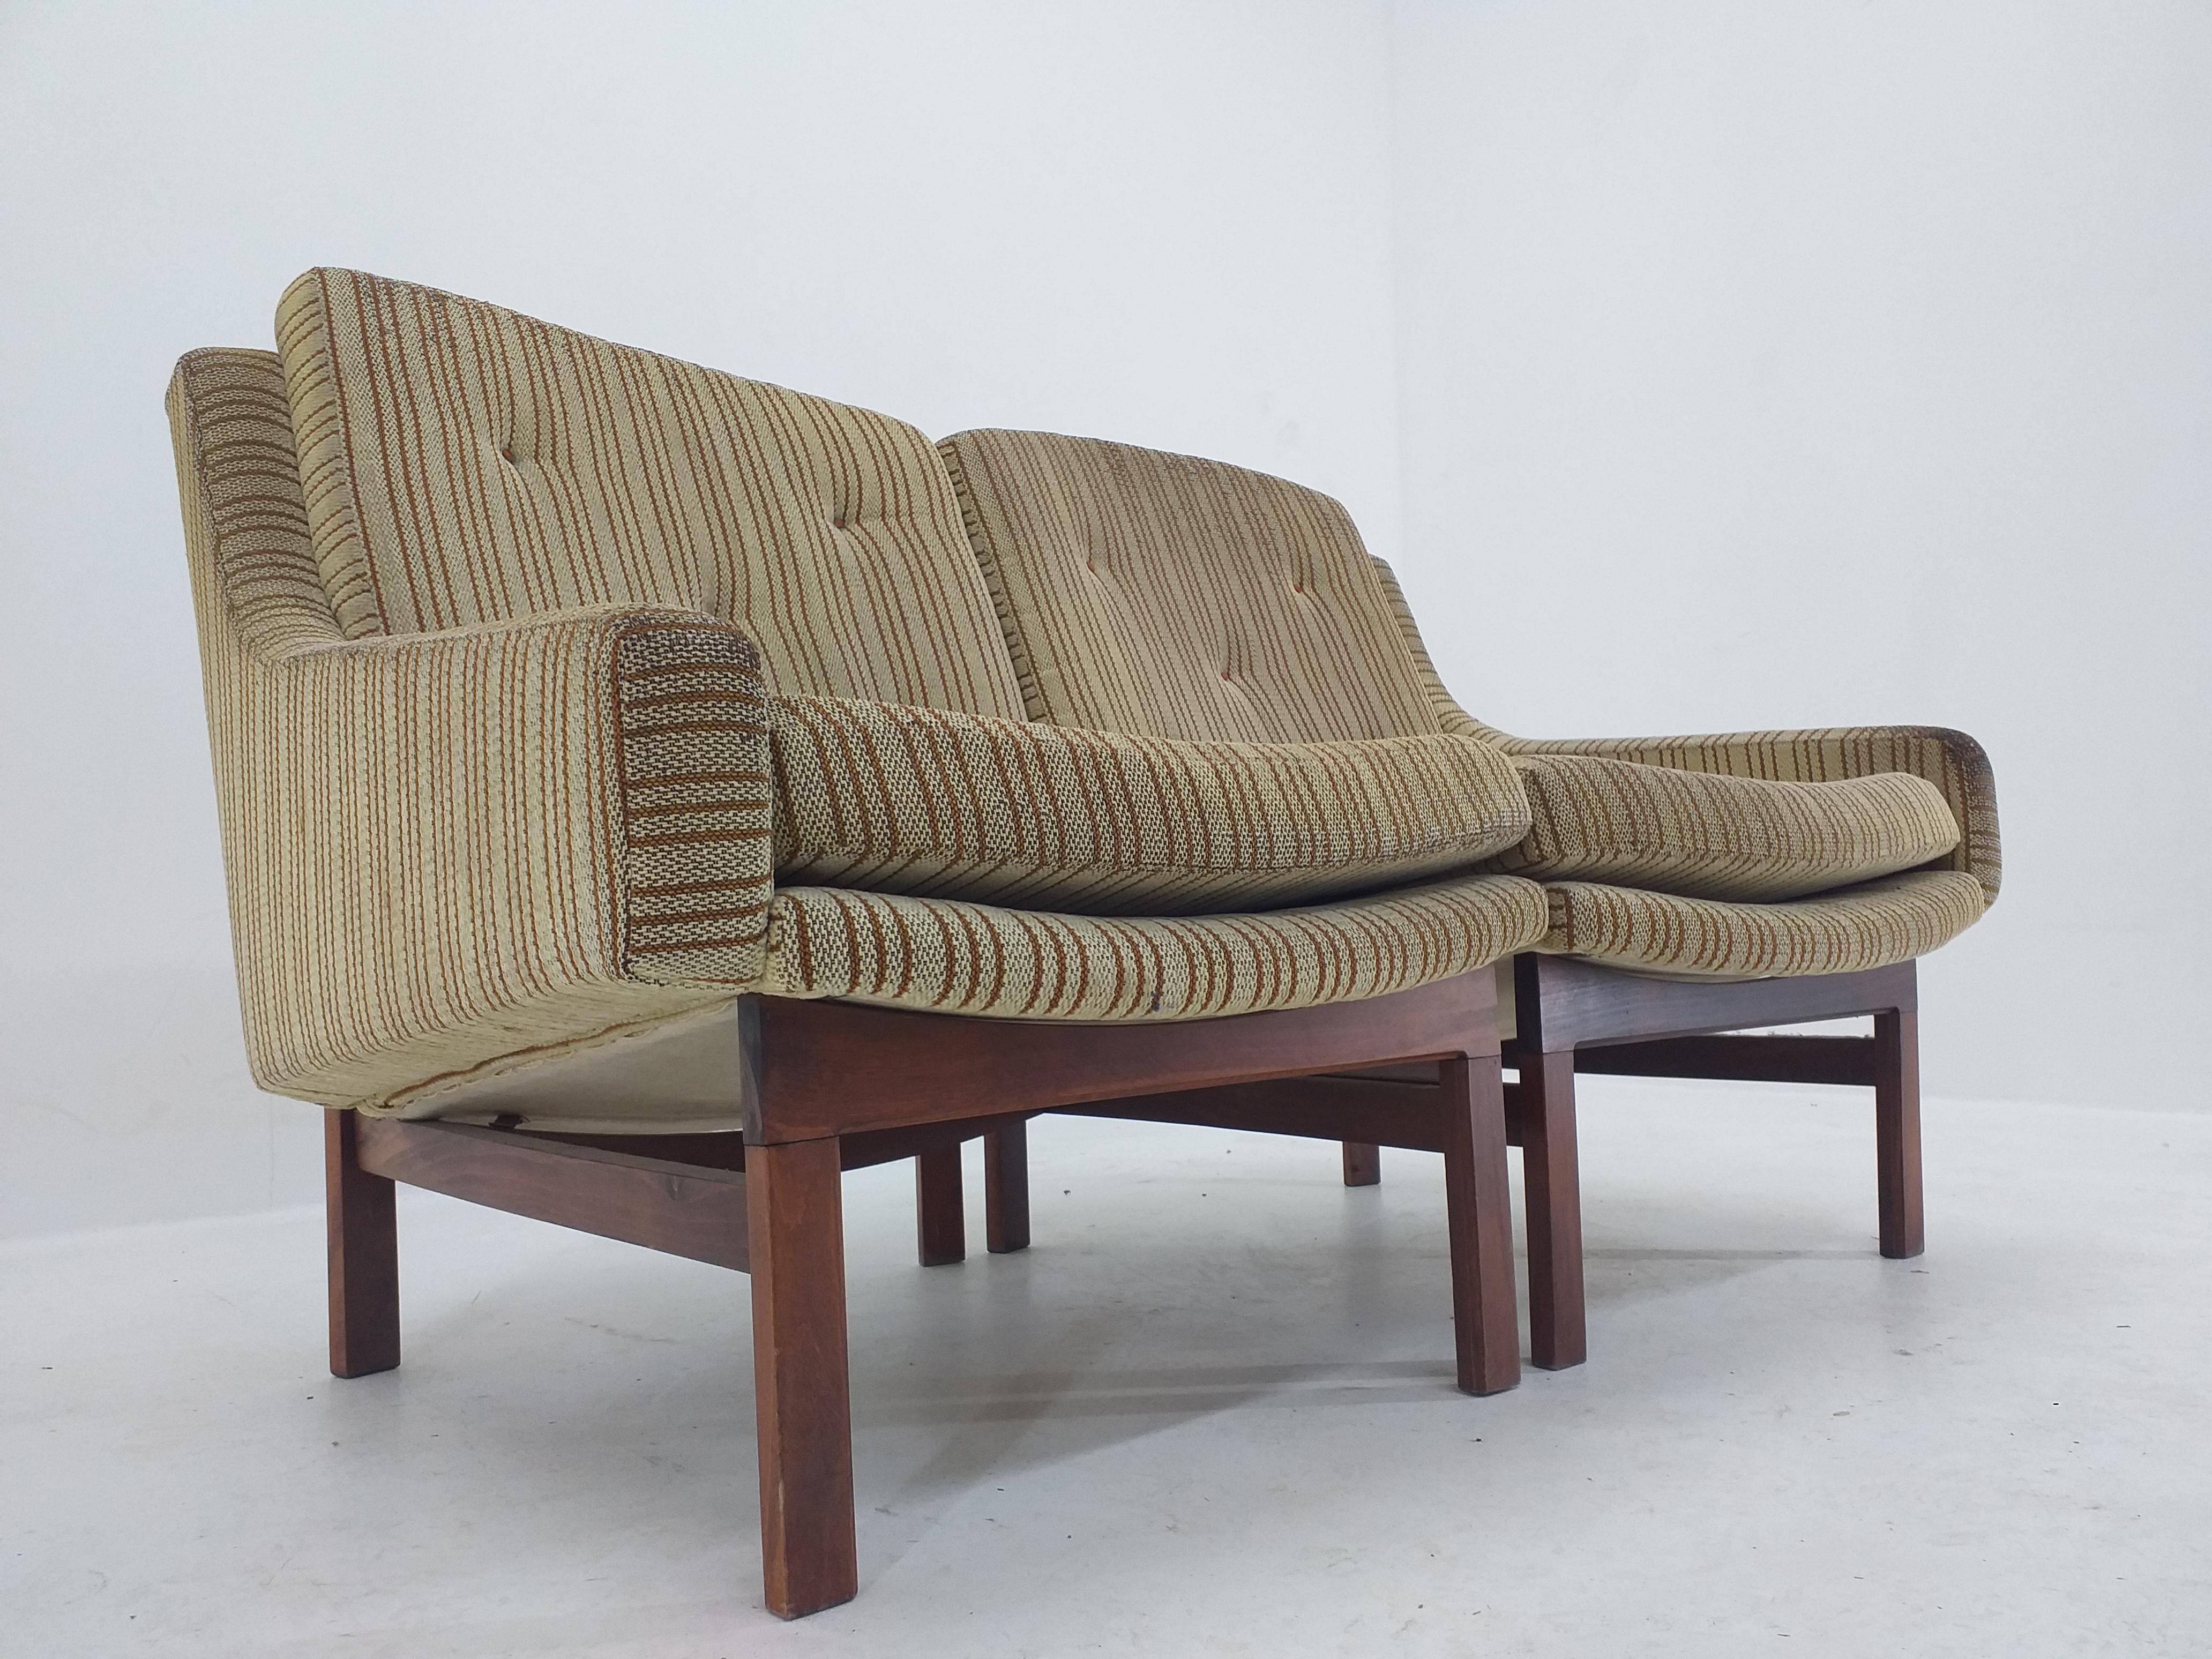 - Very comfortable
- Rare type
- Can be upholstered (customer request).